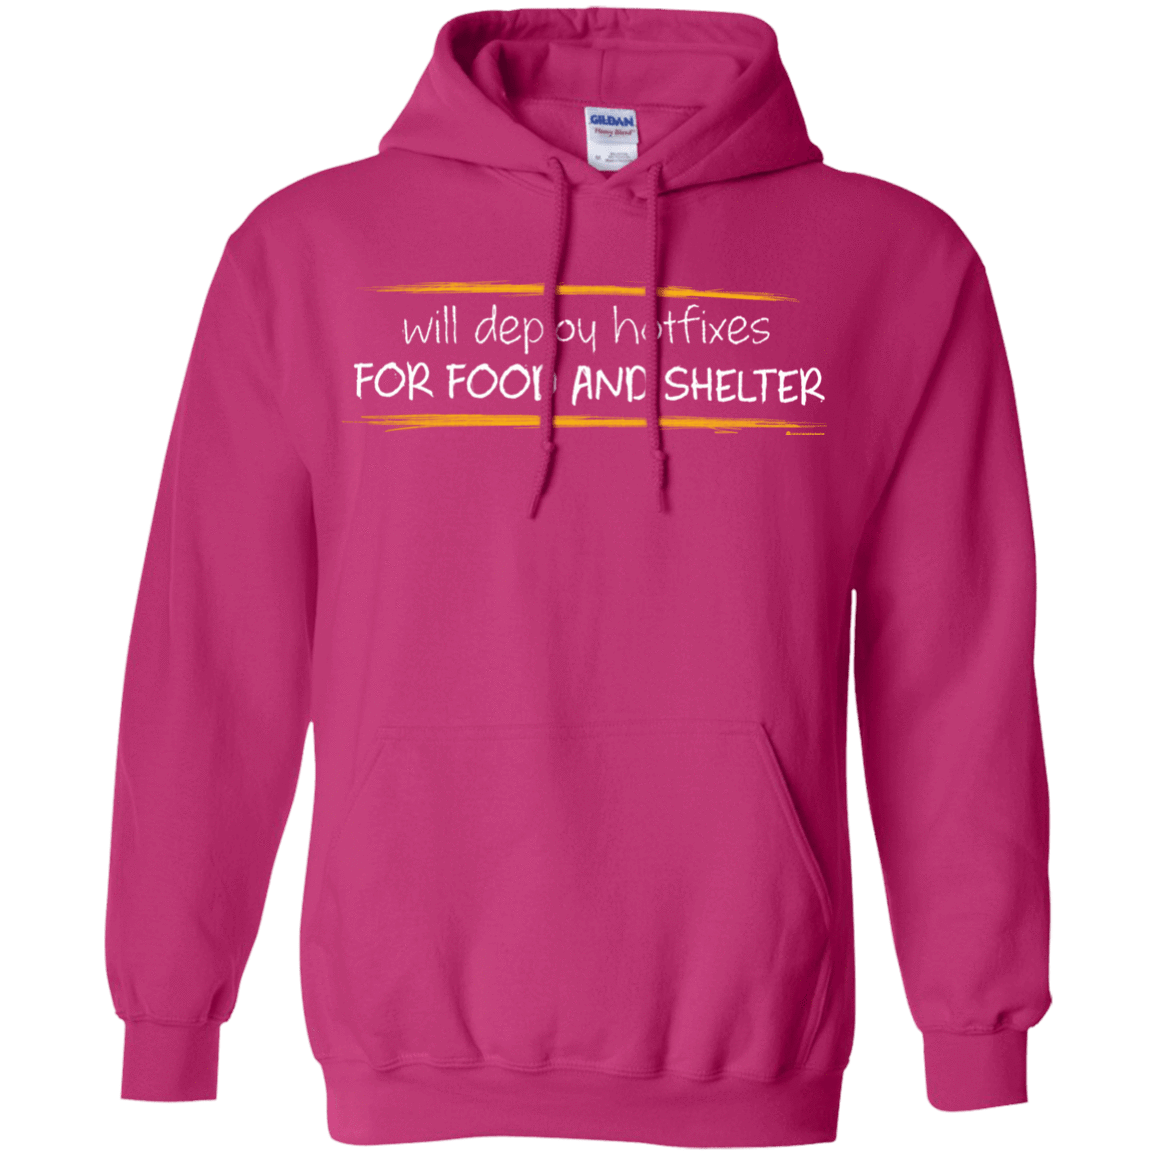 Sweatshirts Heliconia / Small Deploying Hotfixes For Food And Shelter Pullover Hoodie